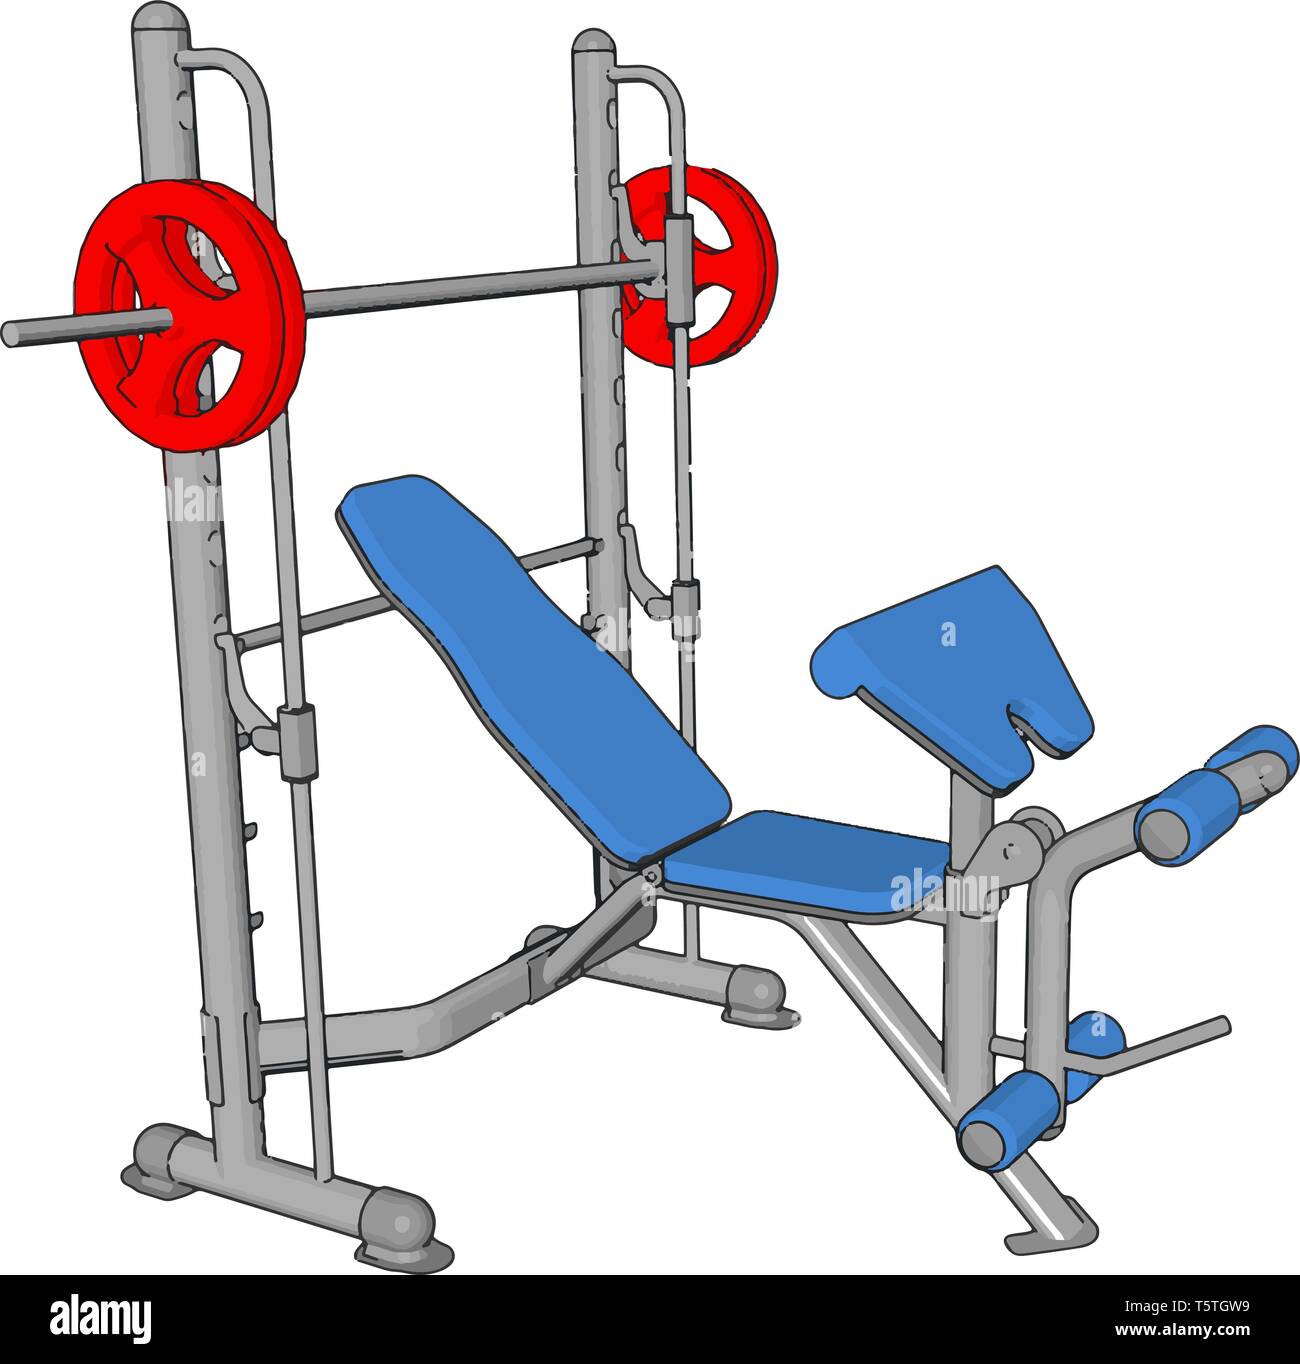 3D vector illustration of a blue gym weight lifting achine on white background Stock Vector